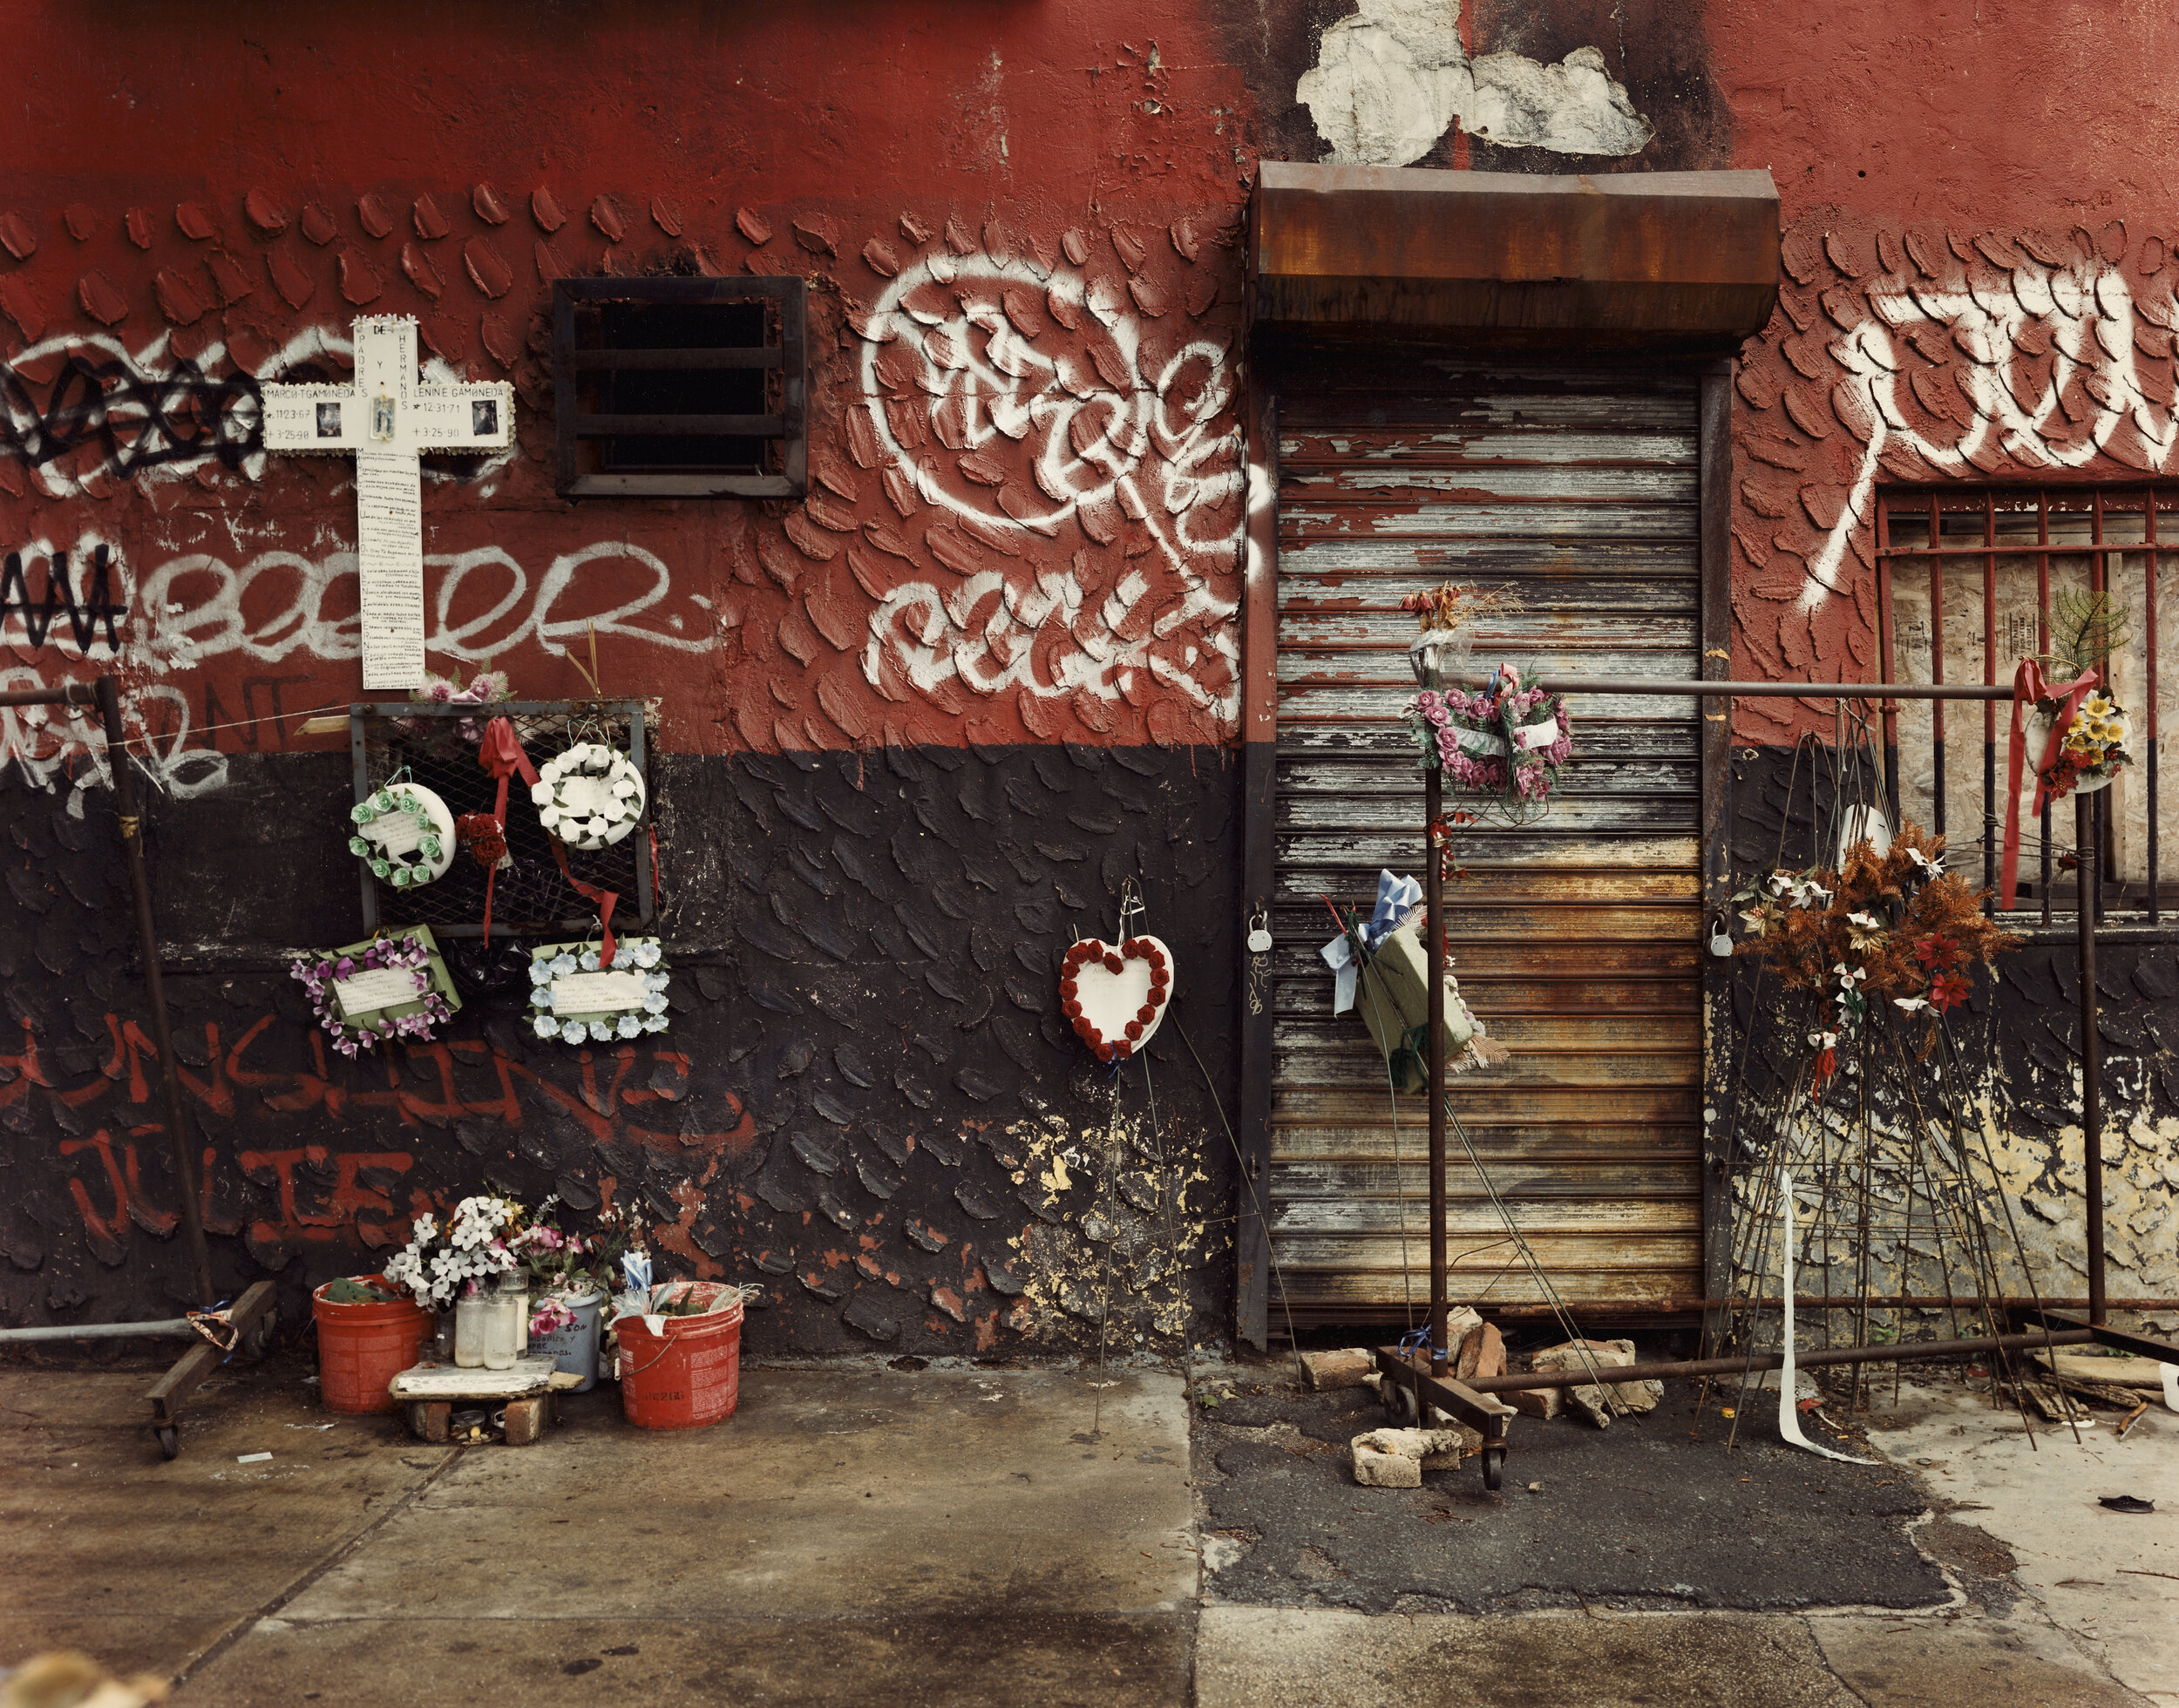 The Happy Land Social Club, 1959 Southern Boulevard, The Bronx, New York, June 1993